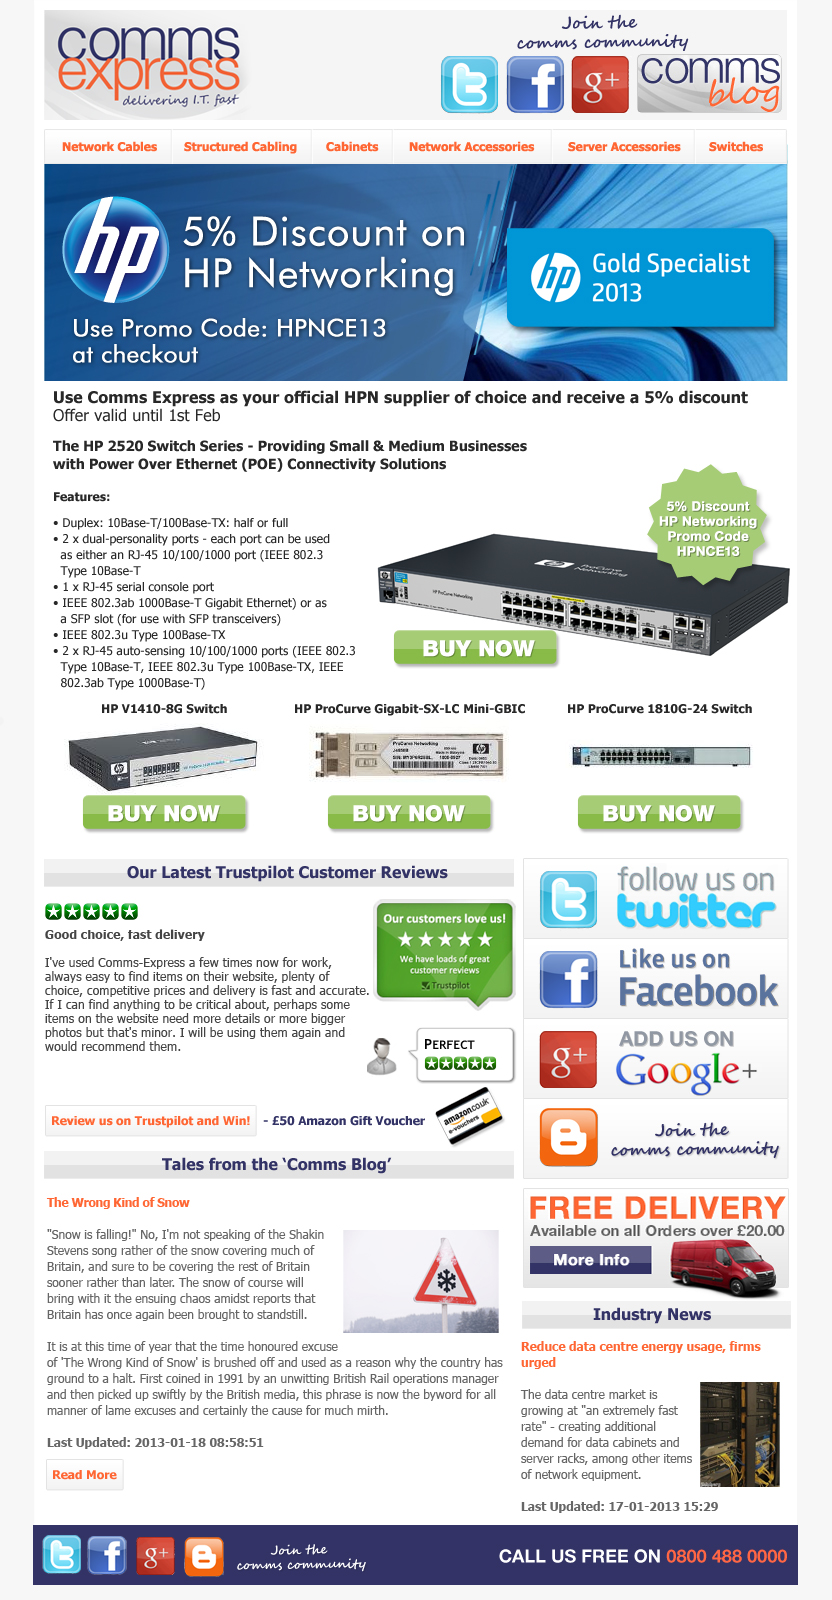 5 Percent Discount on HP Networking